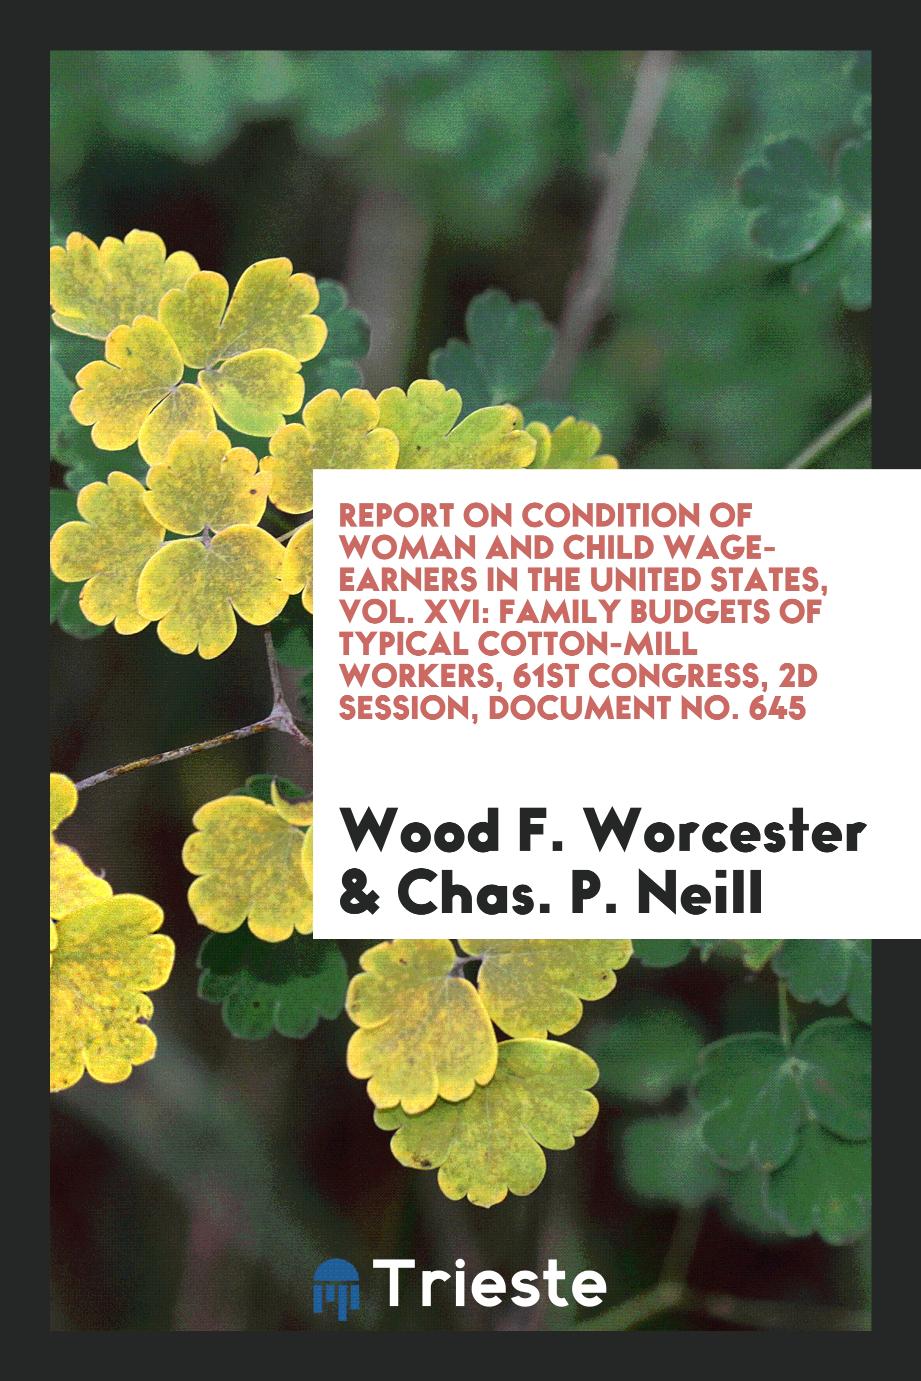 Report on condition of woman and child wage-earners in the United States, Vol. XVI: Family budgets of typical cotton-mill workers, 61st Congress, 2d session, Document No. 645